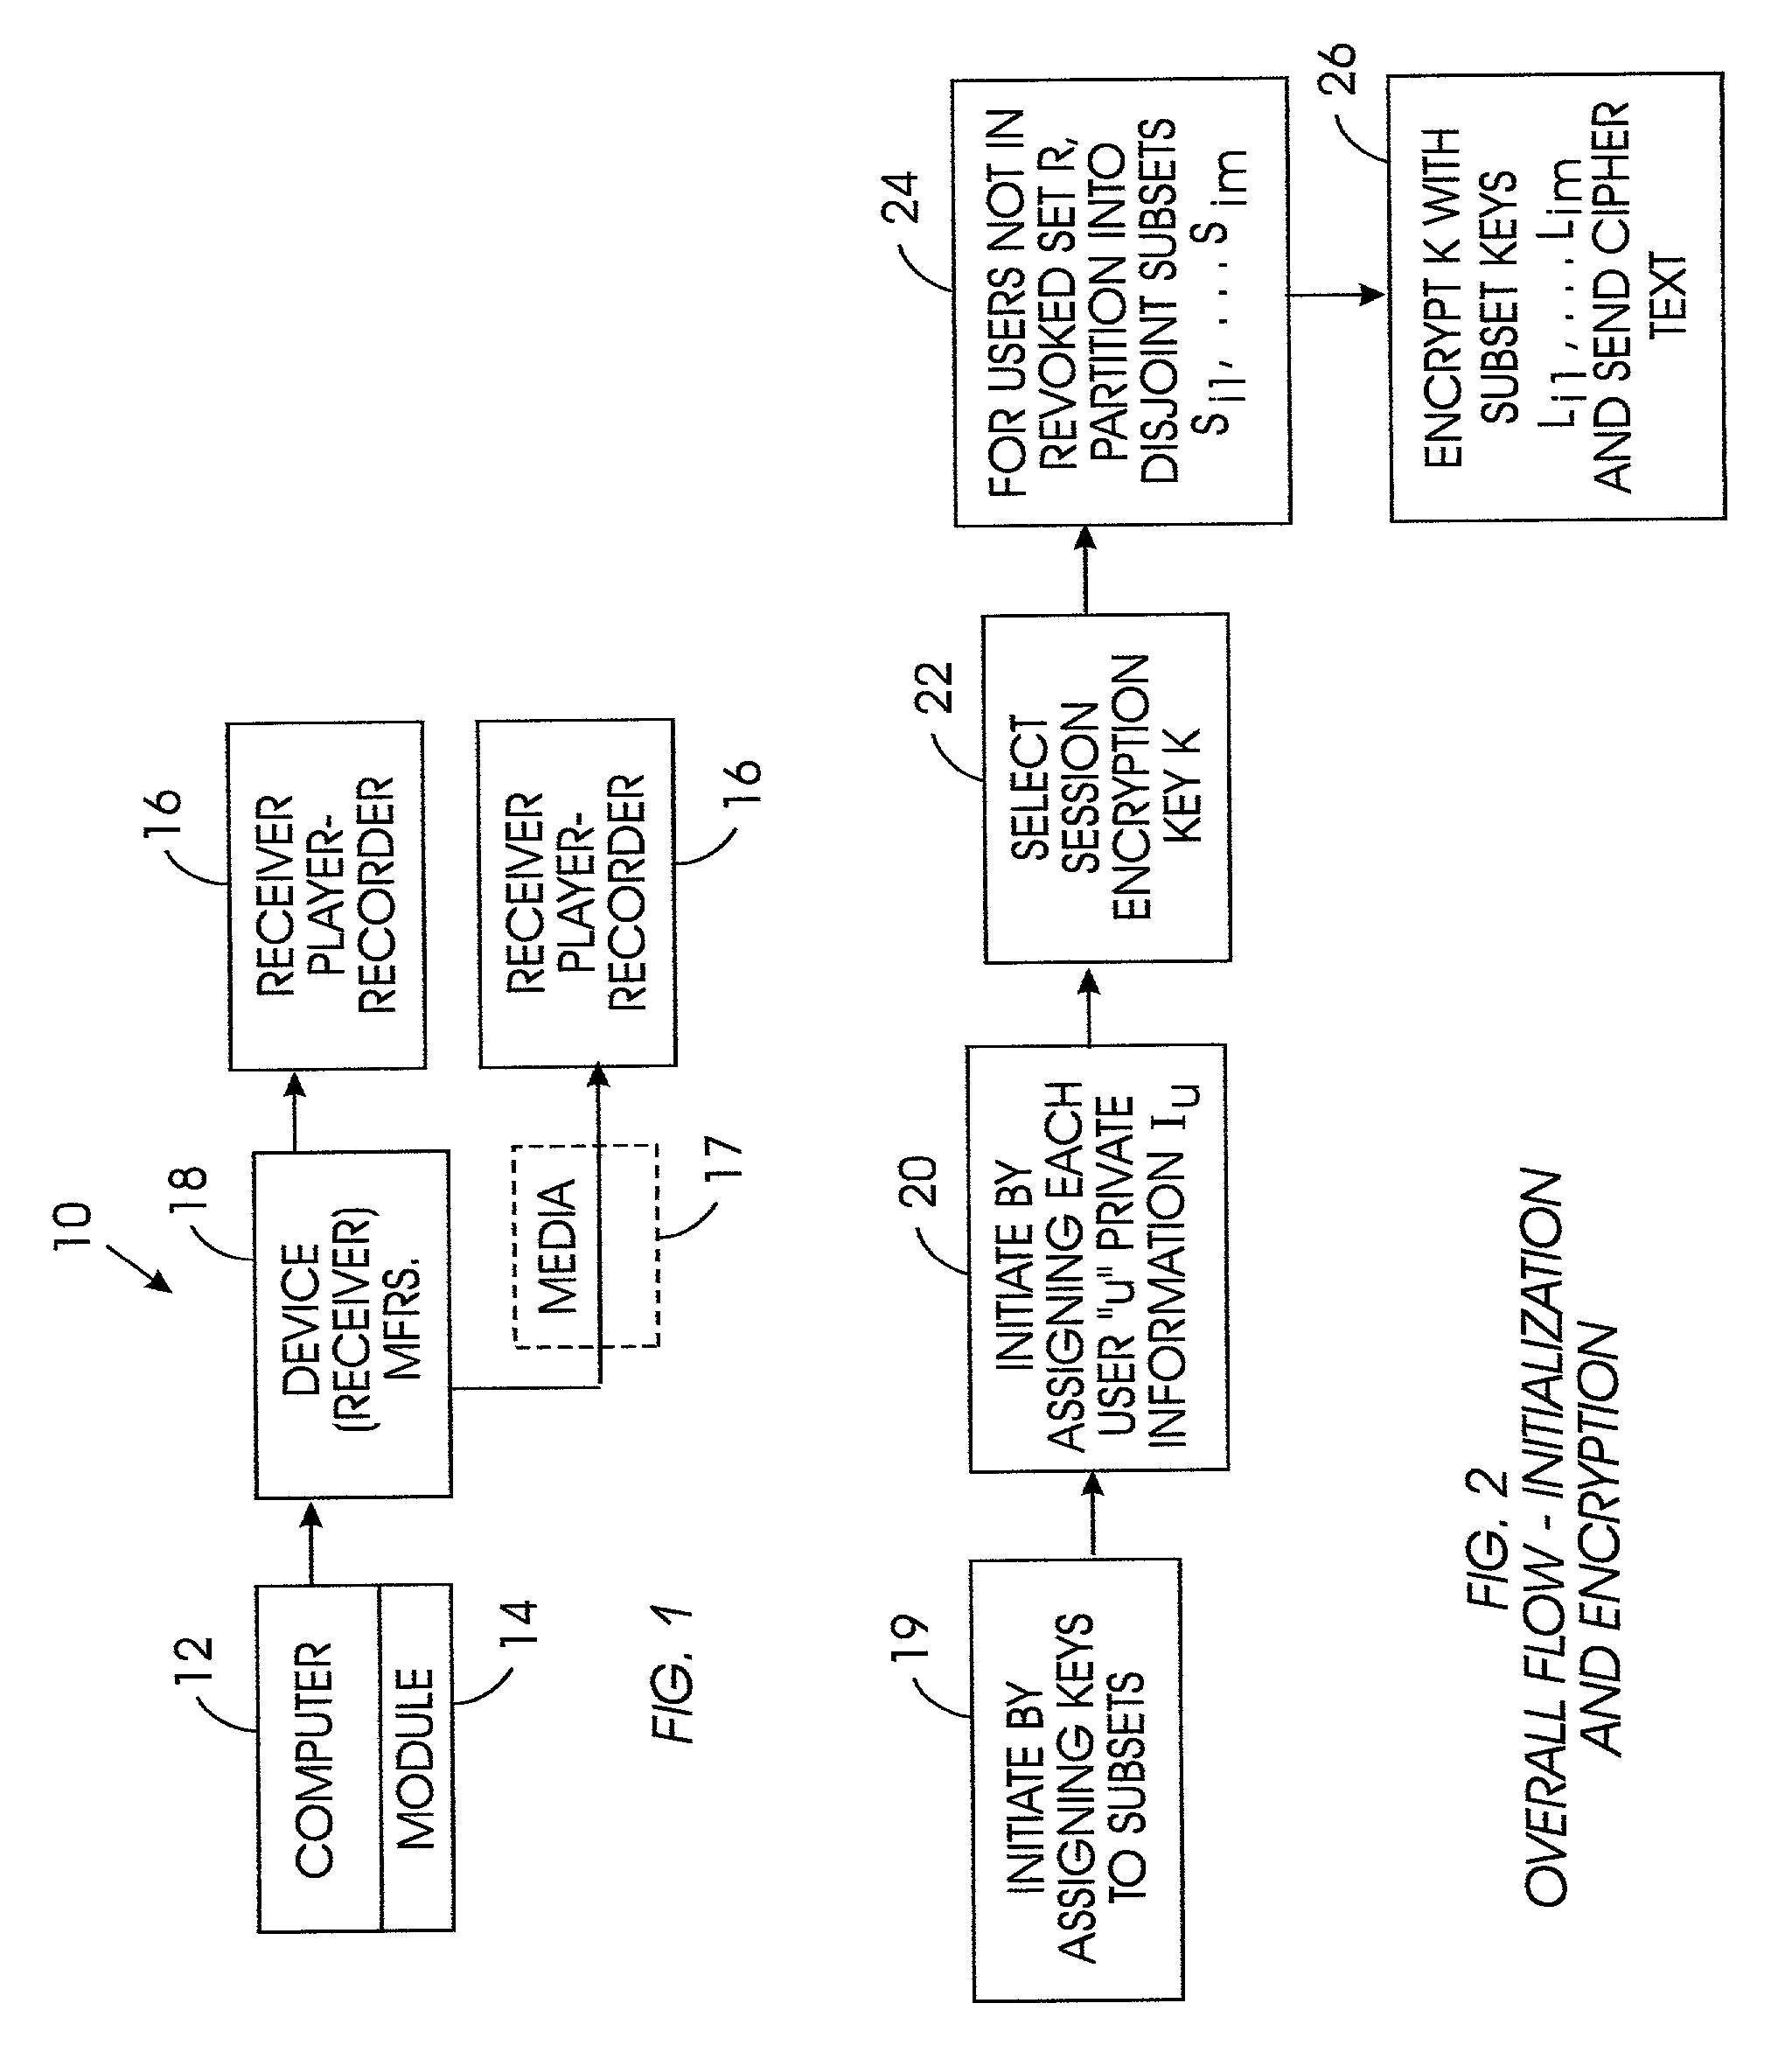 Method for tracing traitor receivers in a broadcast encryption system